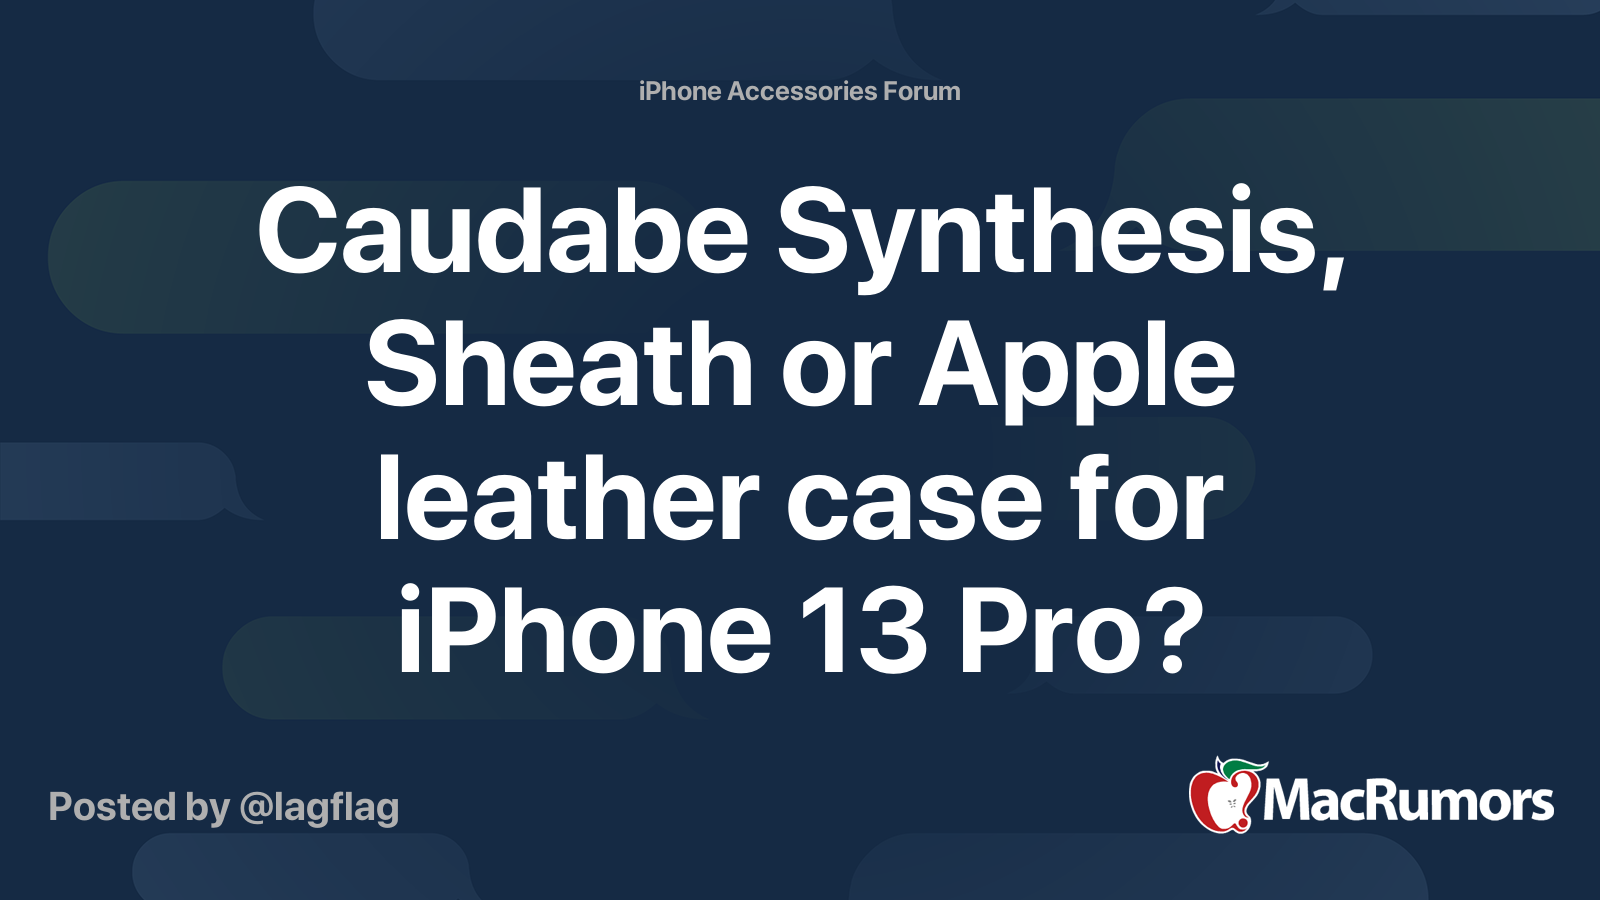 Caudabe Synthesis, Sheath or Apple leather case for iPhone 13 Pro